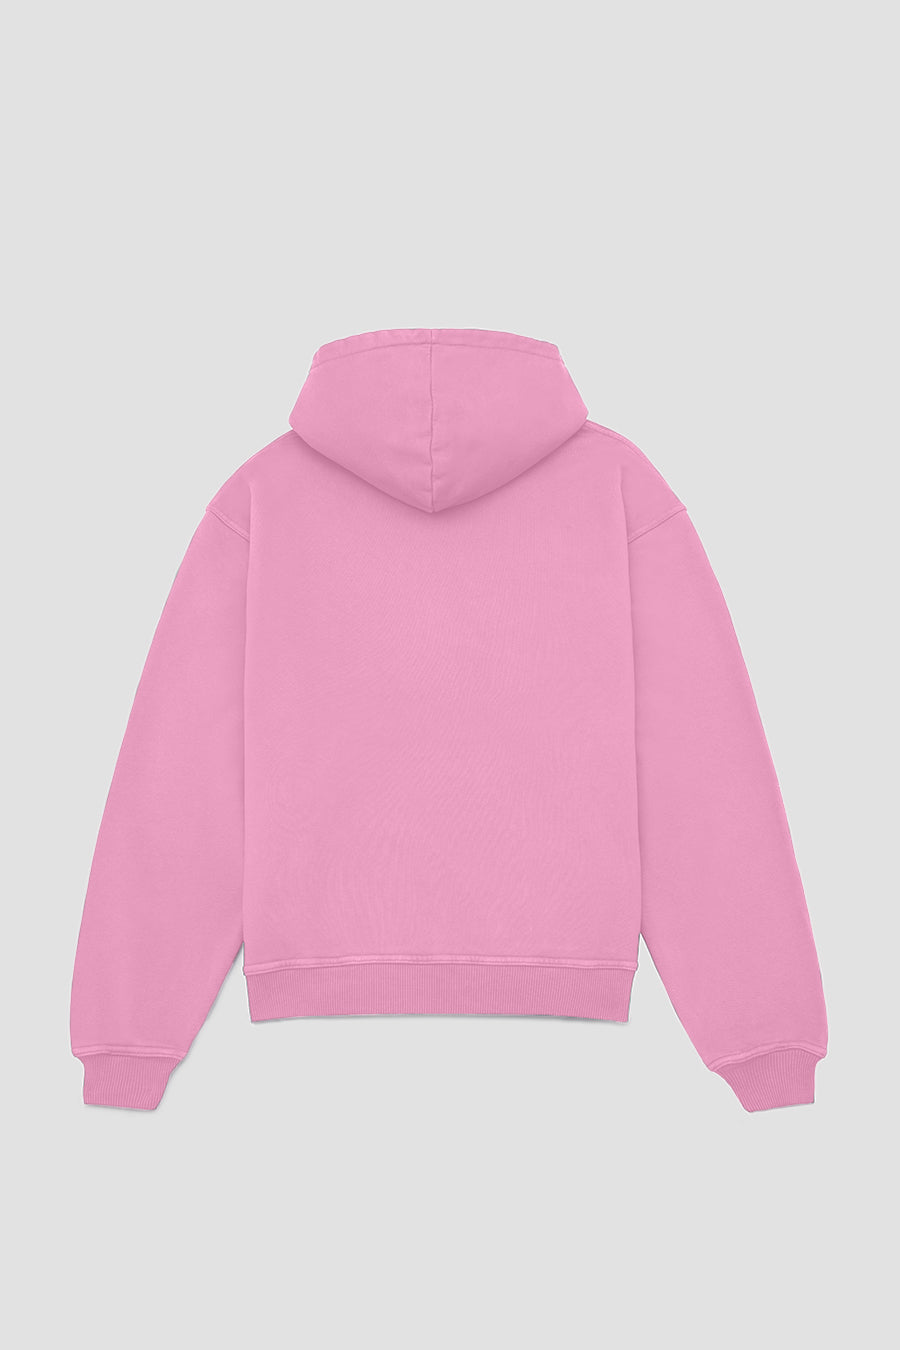 Pink Hoodie - only available in wholesale